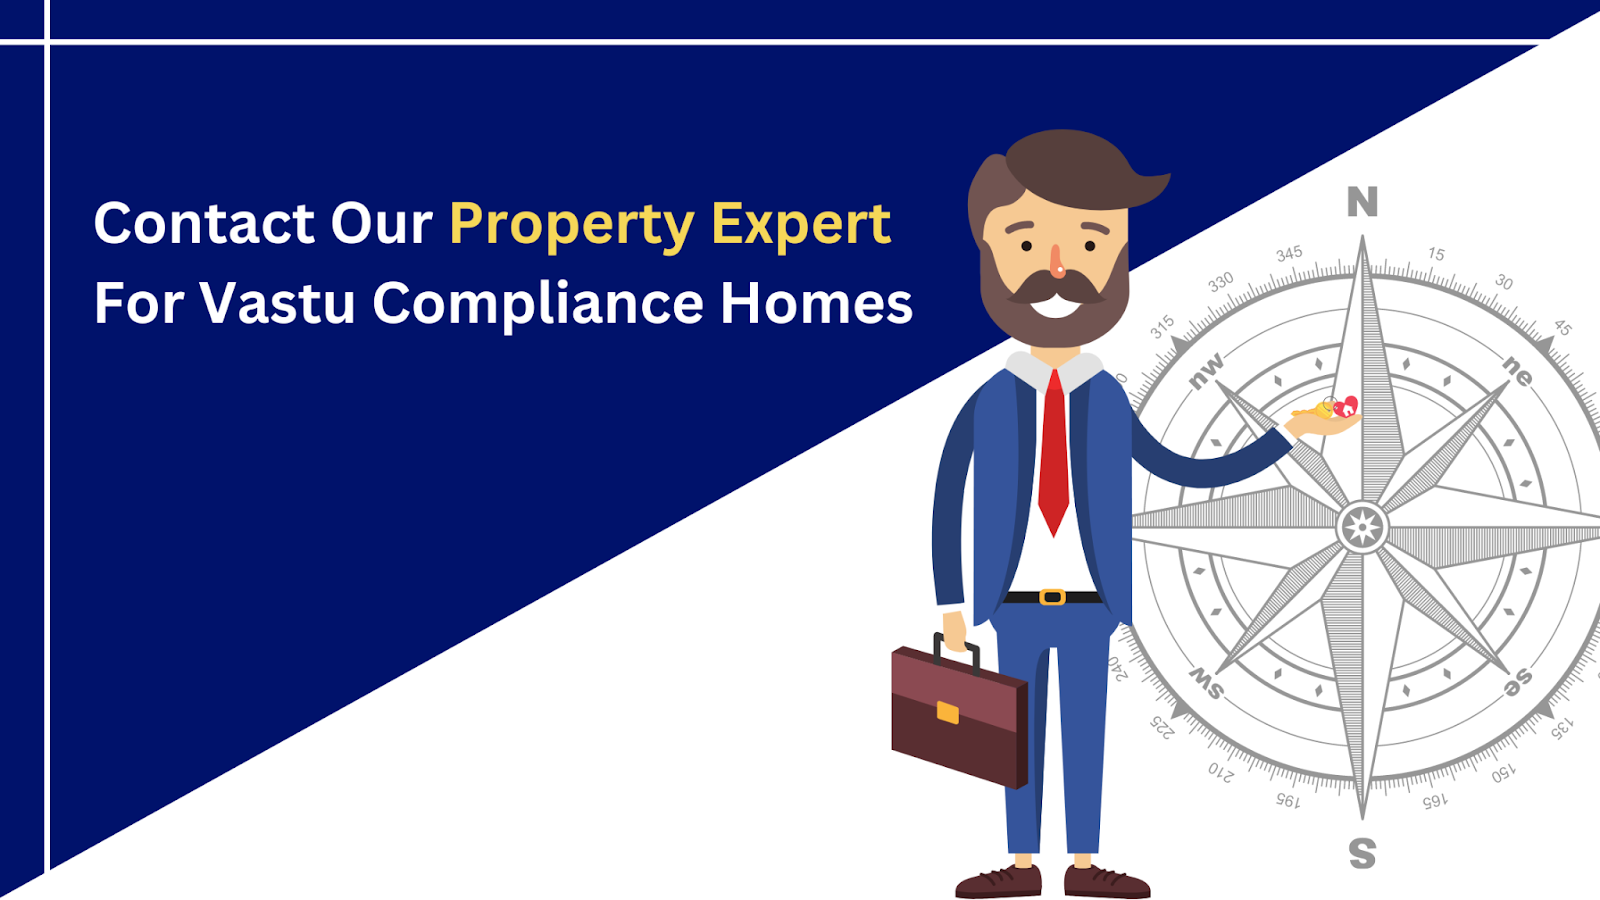 PropetyCloud-Contact our property expert for vastu compliance homes